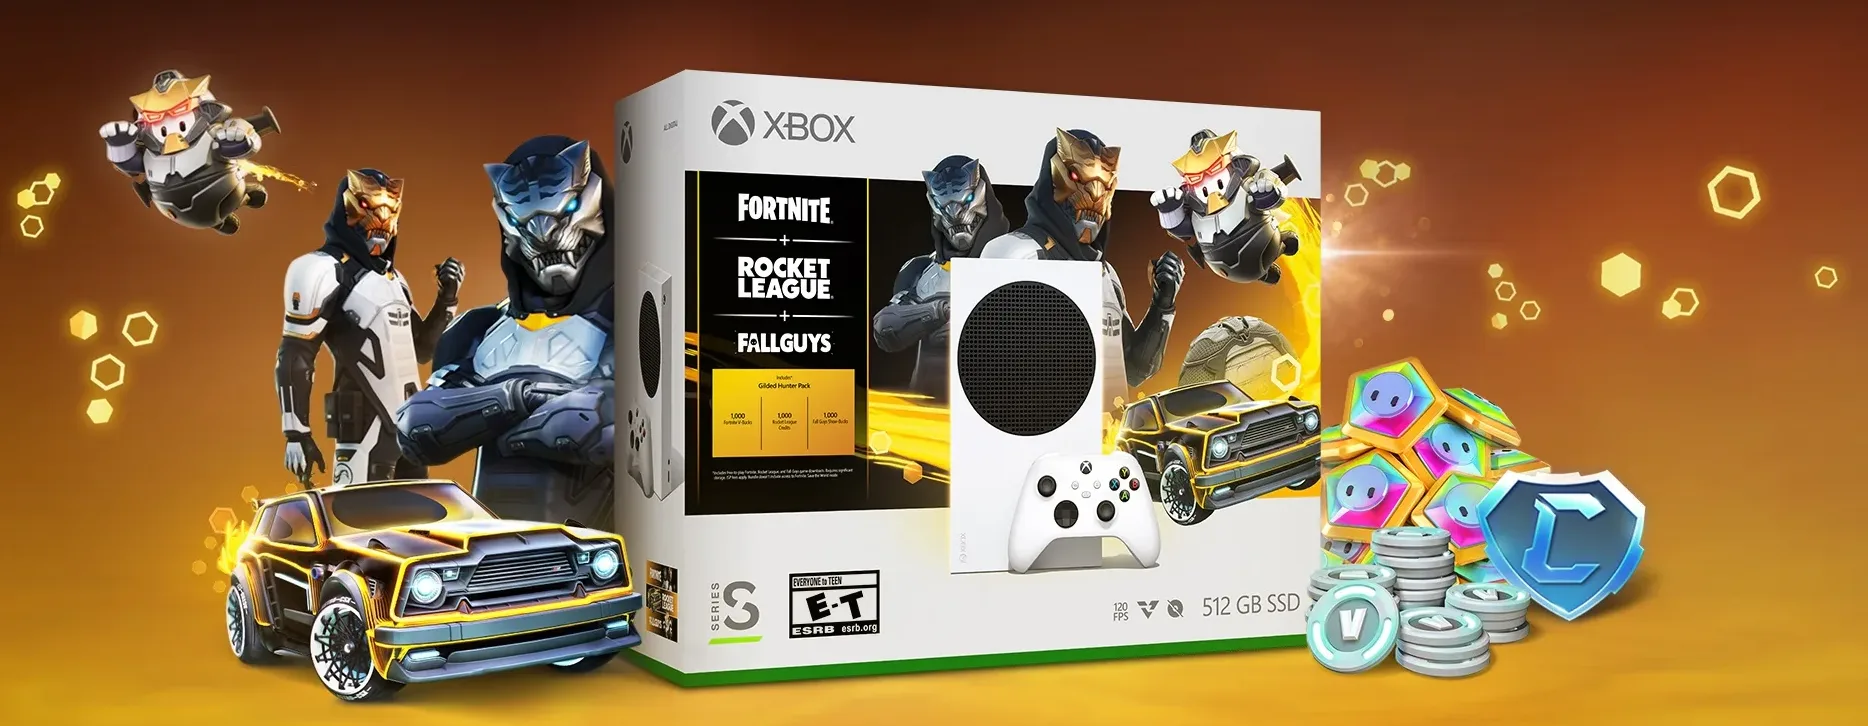 Amazon Xbox Series Unboxing and Initial Setup